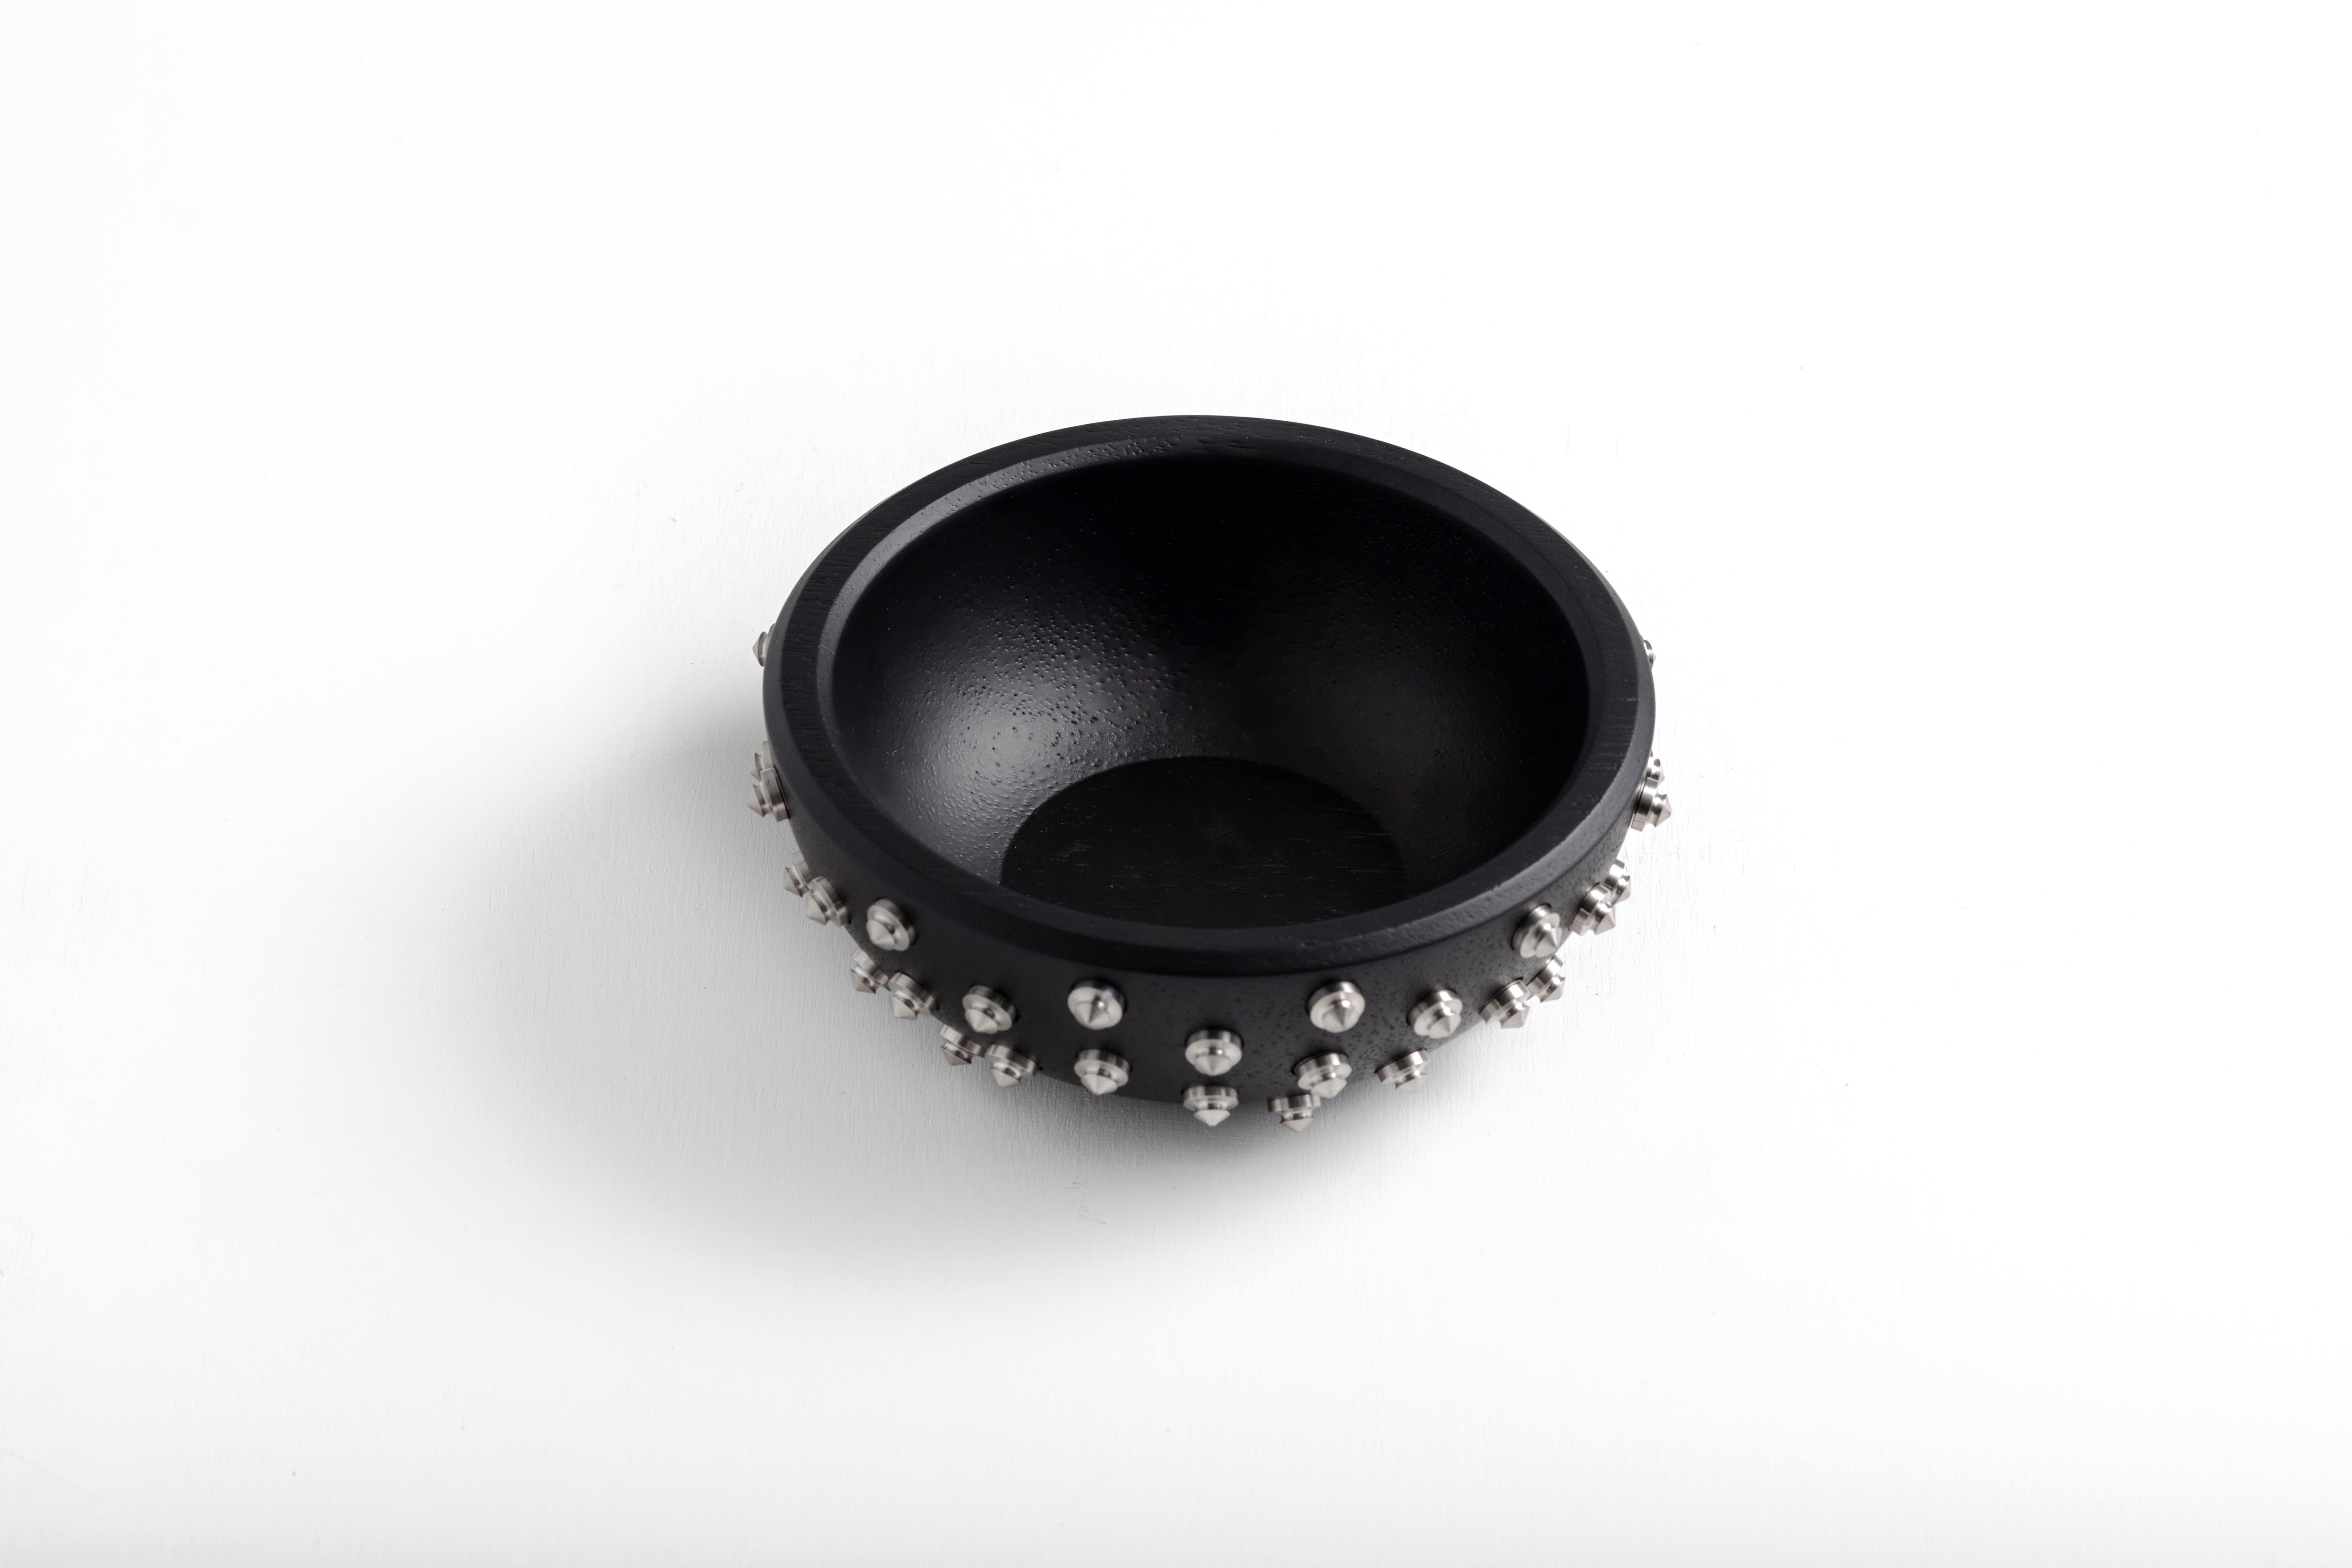 spiked dog bowl